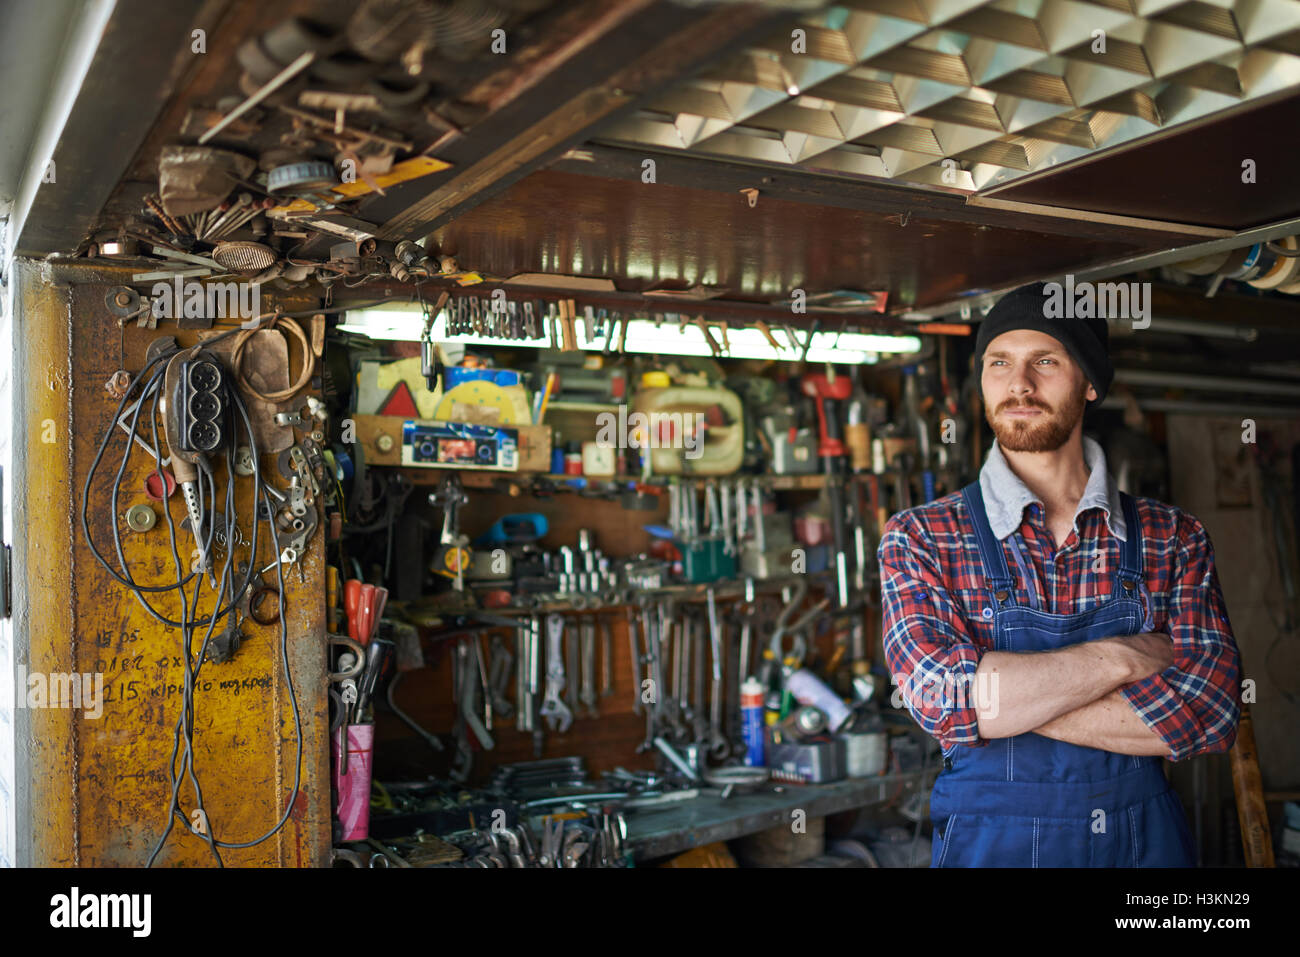 Private entrepreneur and his little workshop Stock Photo